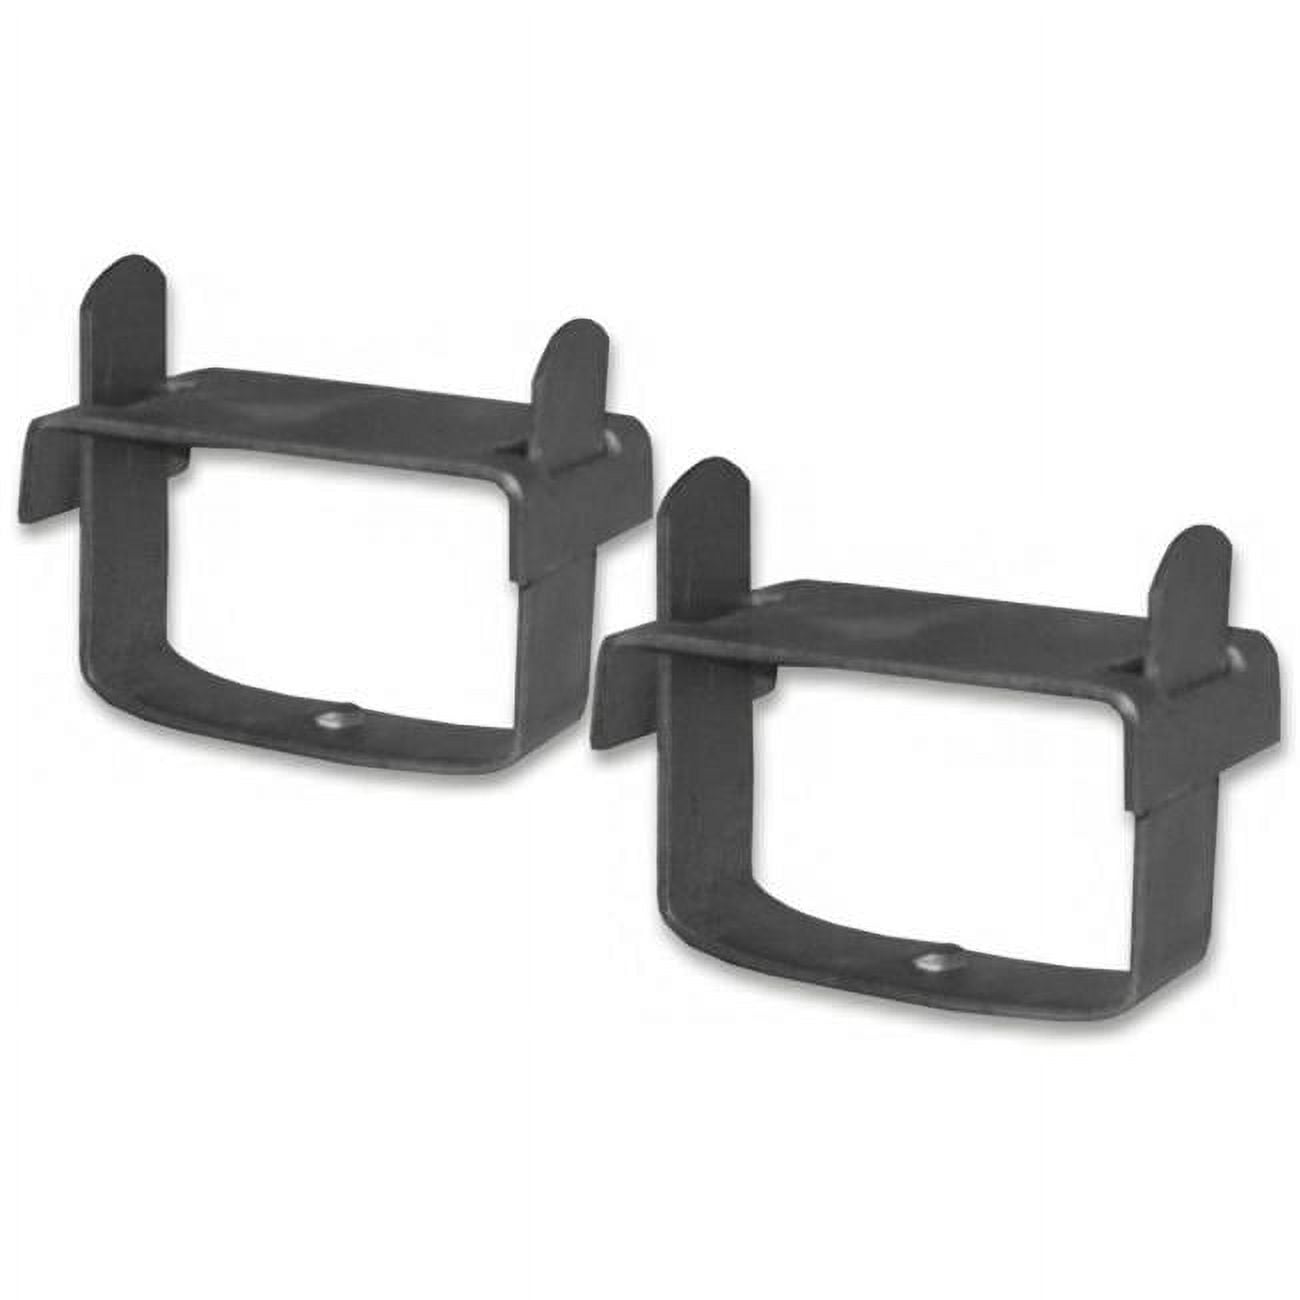 3 Inch Axle Leaf Spring Clamps - Set Of Four (4) (4x4 Off-road Vehicles)